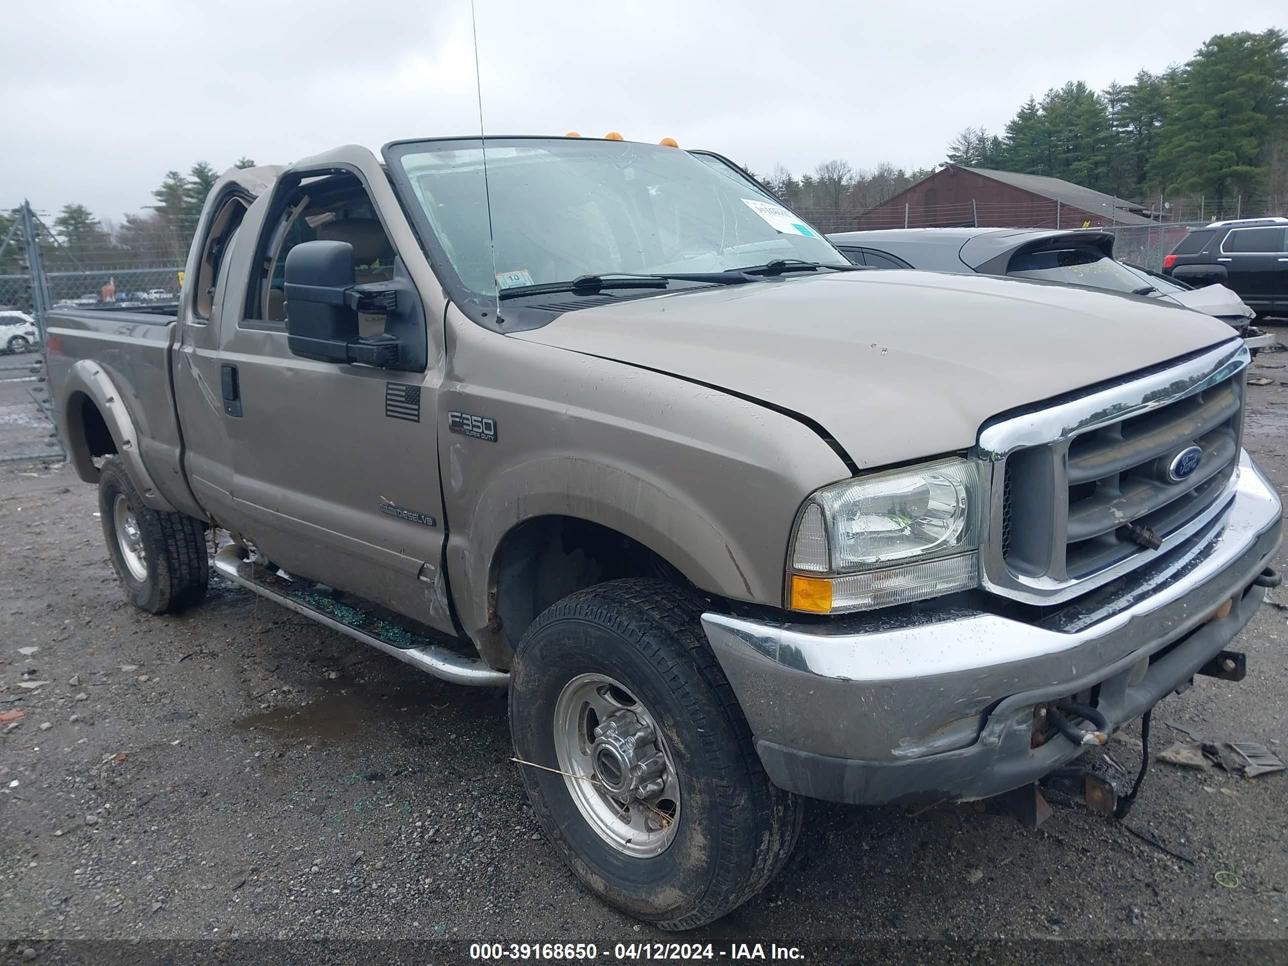 vin: 1FTSX31F53EA17201 1FTSX31F53EA17201 2003 ford f350 7300 for Sale in 01464, 2 Going Rd, Shirley, Massachusetts, USA